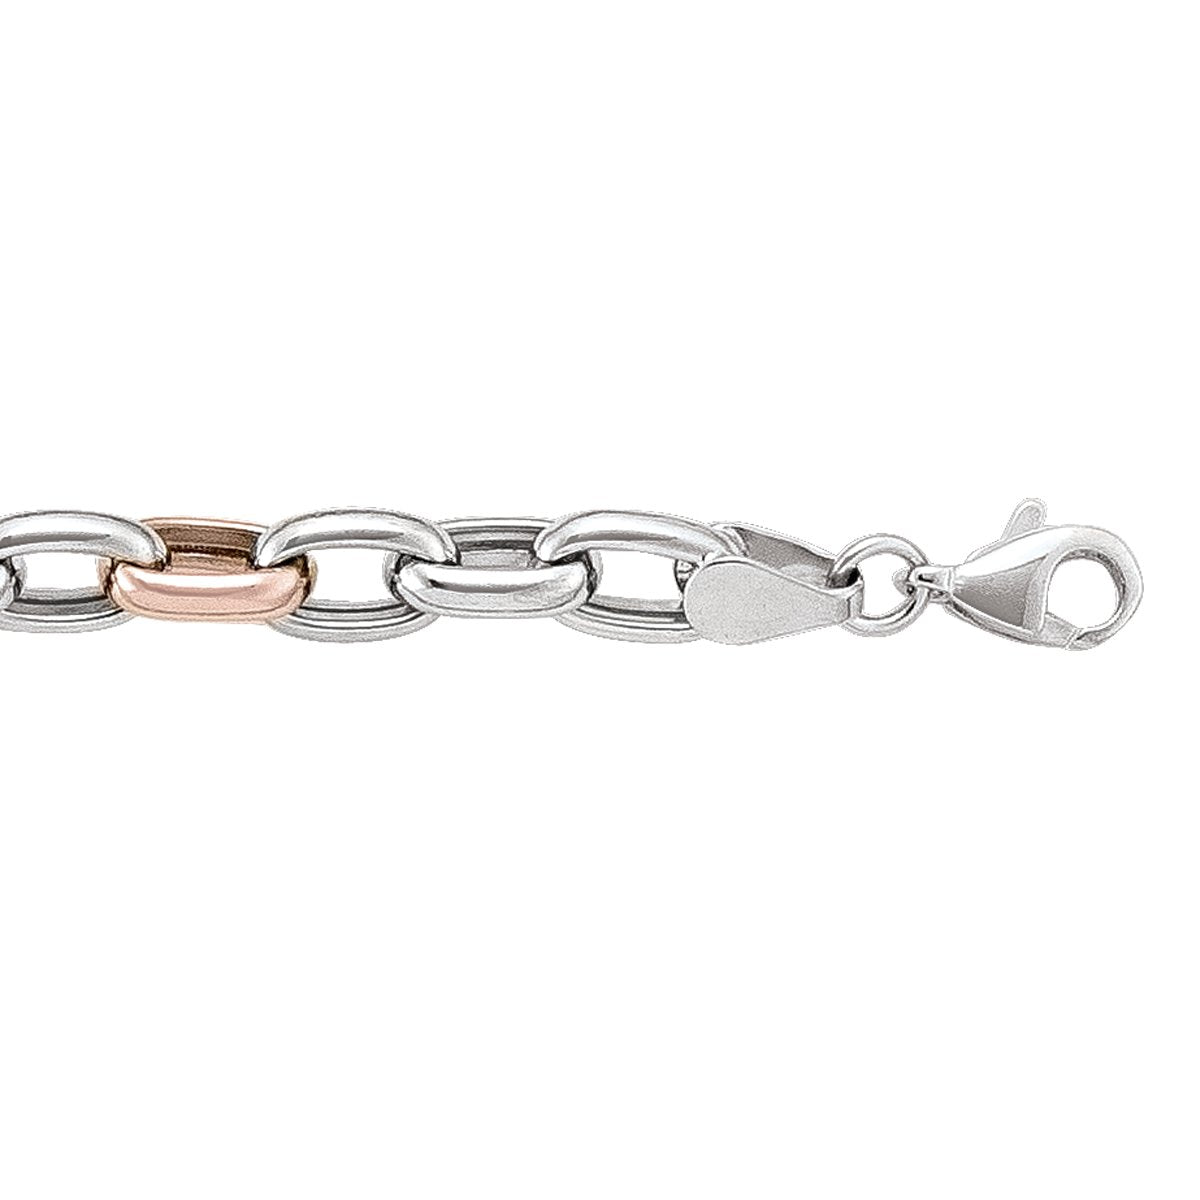 PINK AND WHITE GOLD FANCY HOLLOW LINK BRACELET